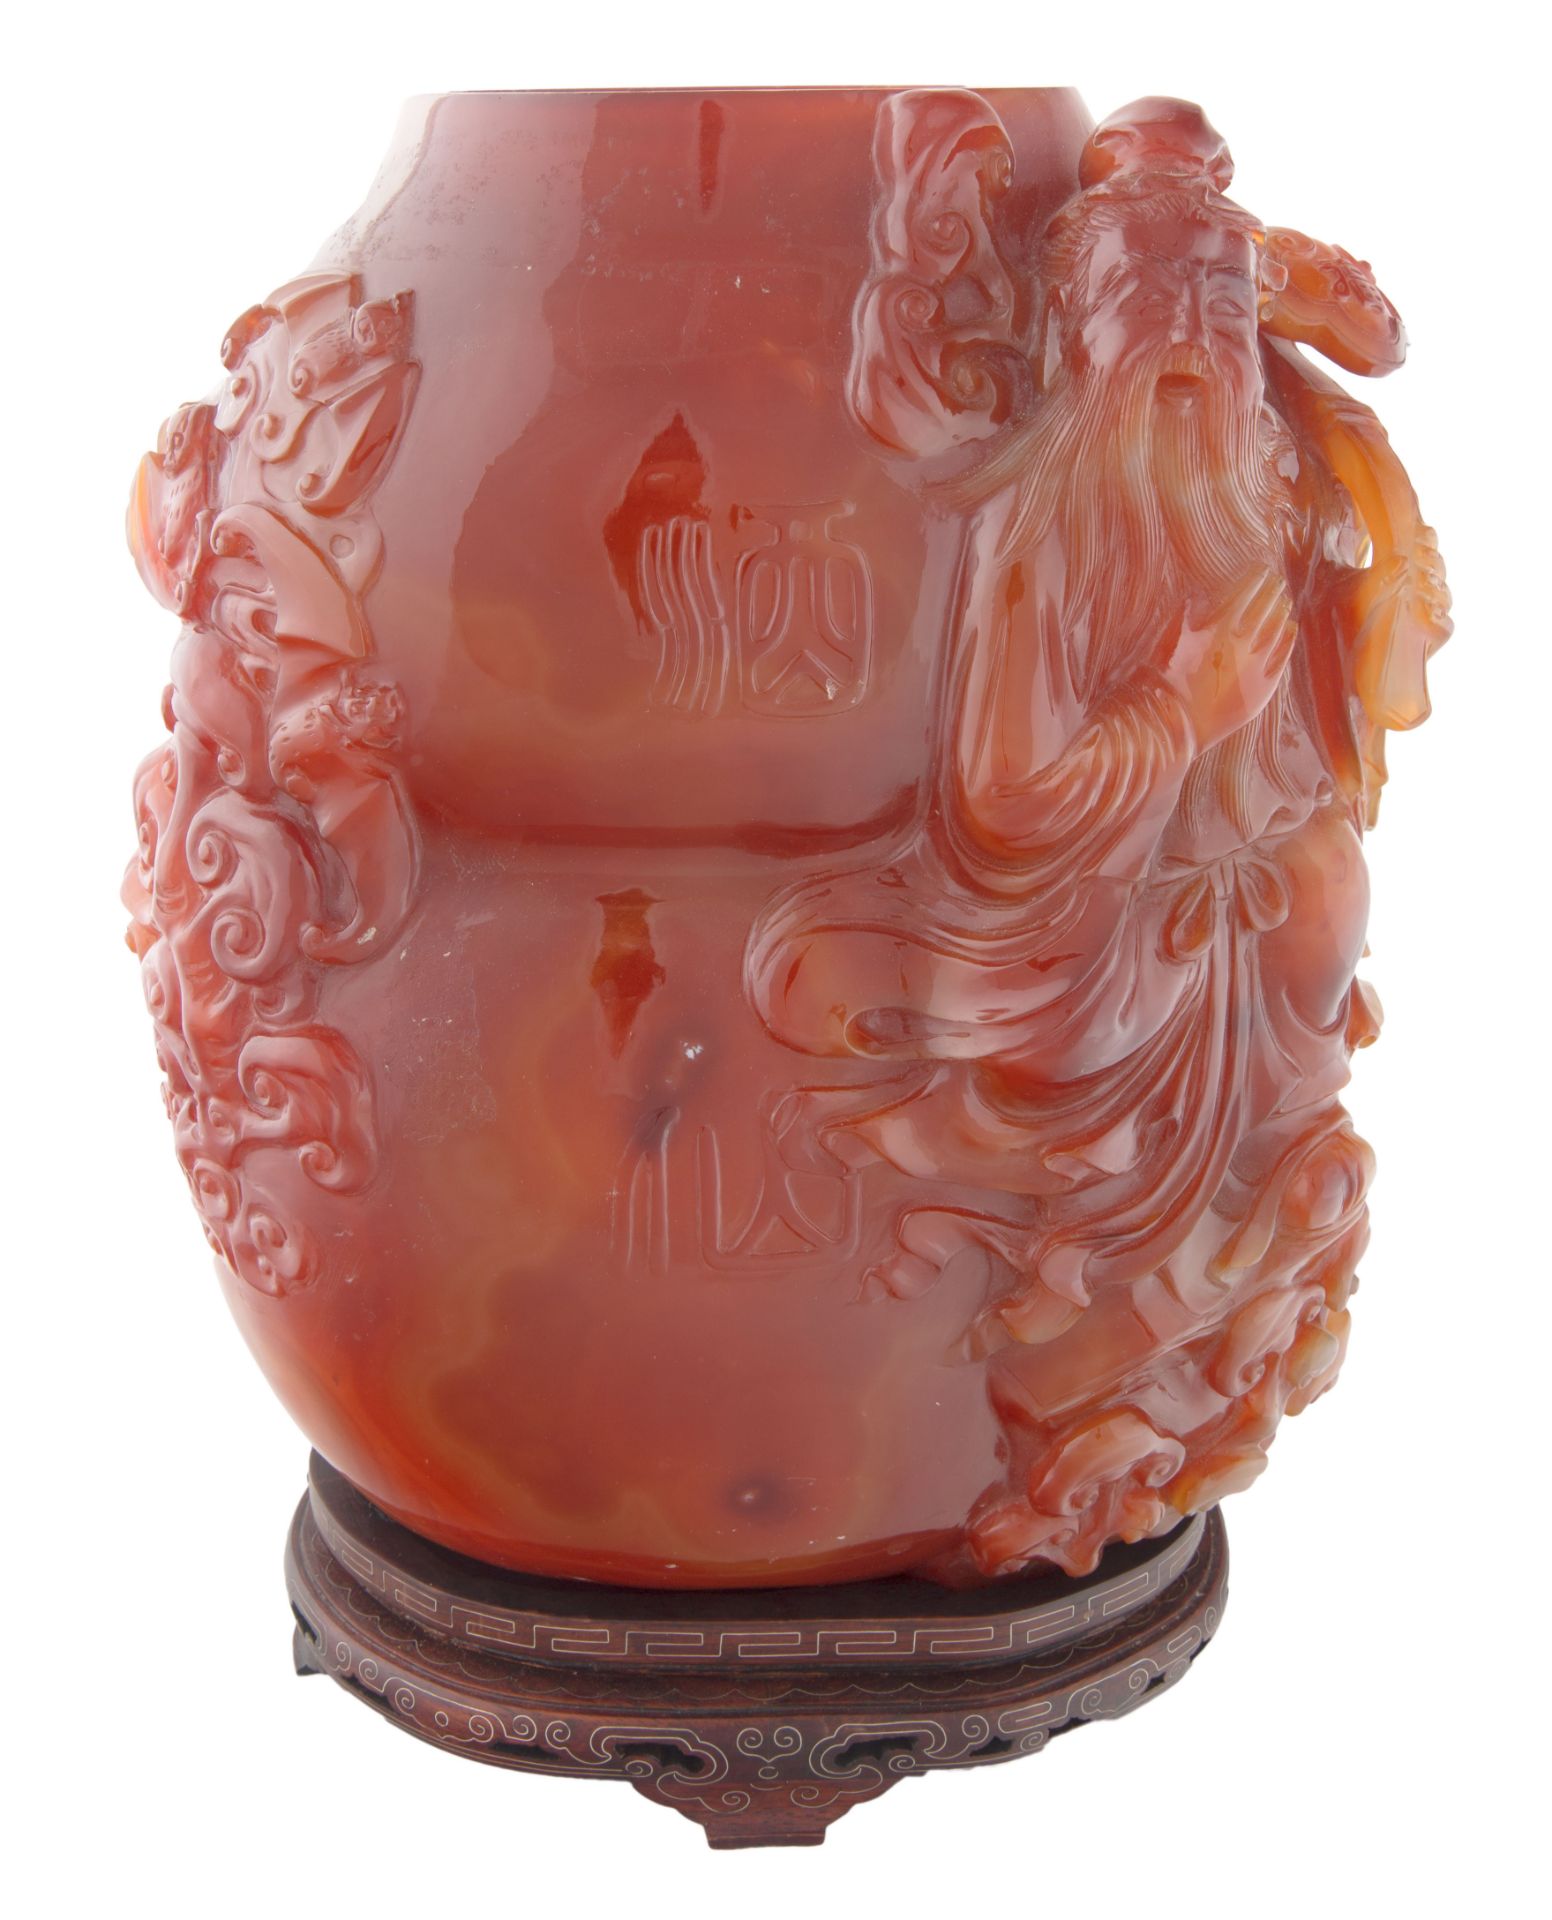 A FINE CHINESE CARNELIAN AGATE VESSEL WITH COVER, QING DYNASTY, LATE 19TH CENTURY - Bild 6 aus 6